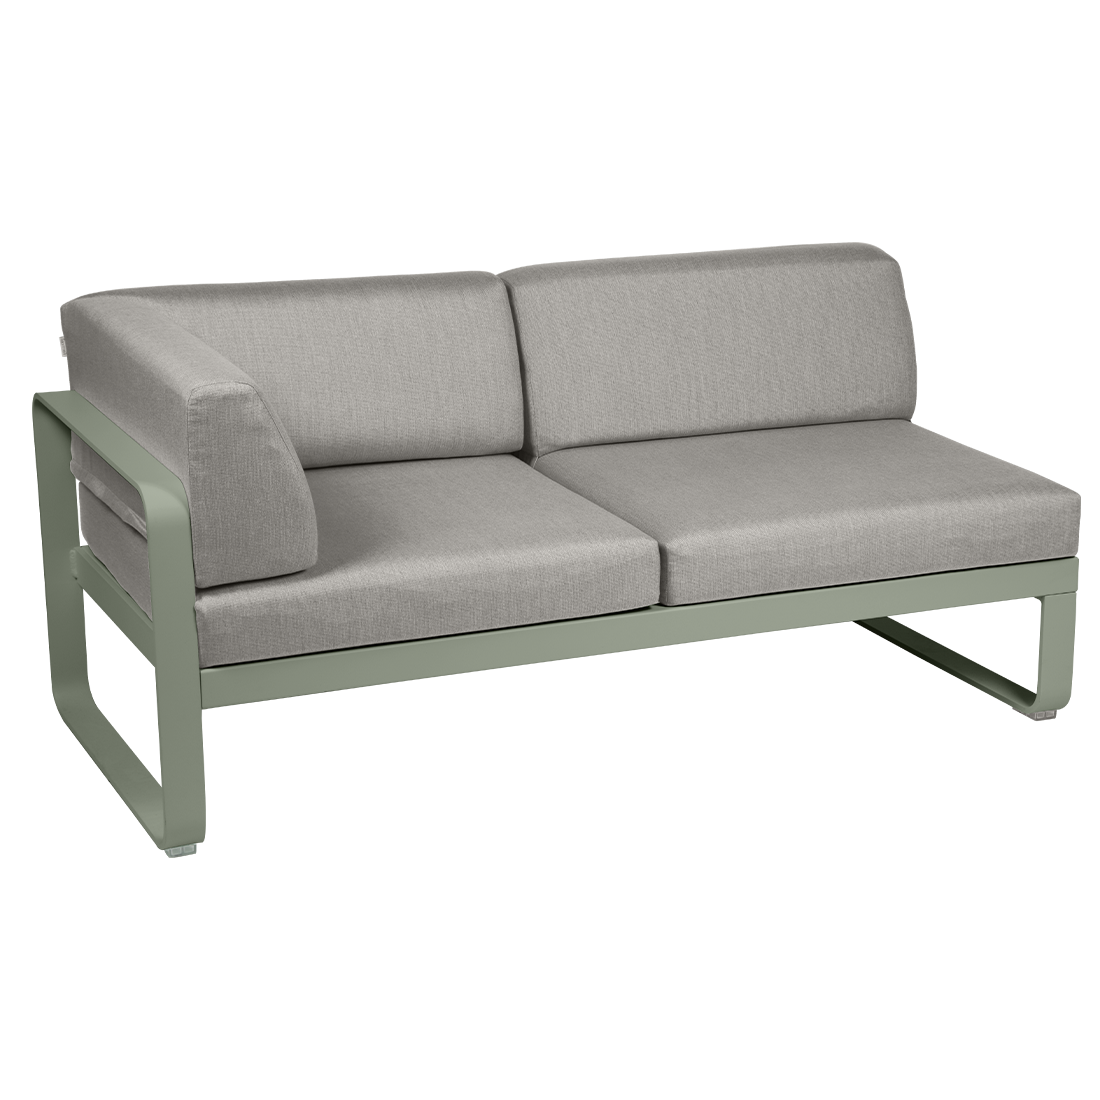 2-seater corner element BELLEVIE with side cushions - left